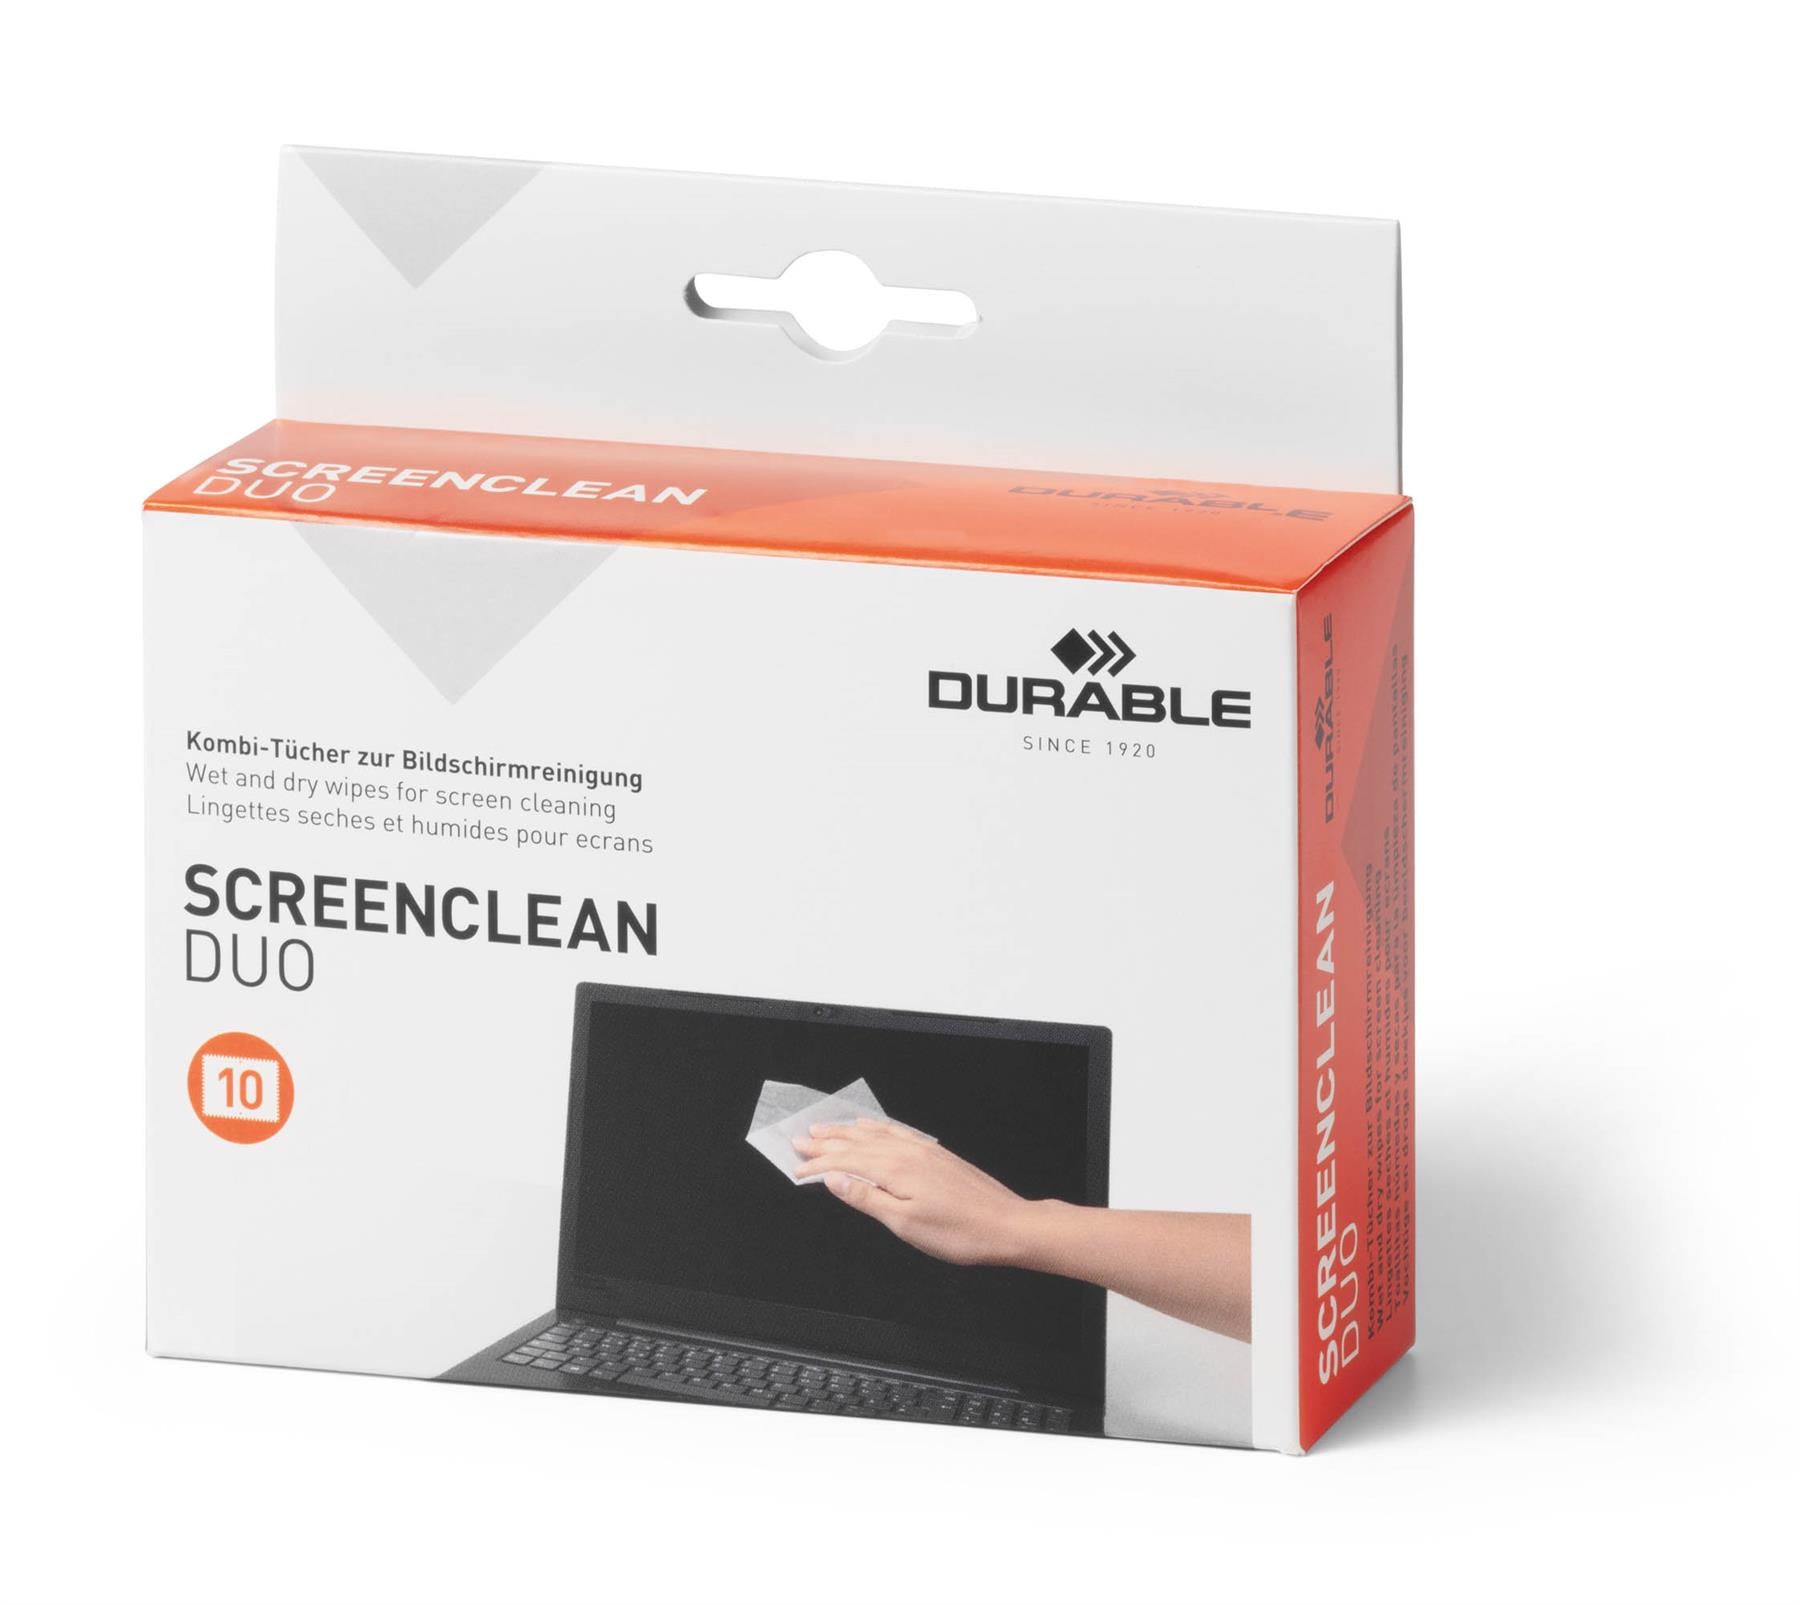 Durable SCREENCLEAN DUO Biodegradable Wet & Dry Screen Cleaning Wipes | 10 Pairs